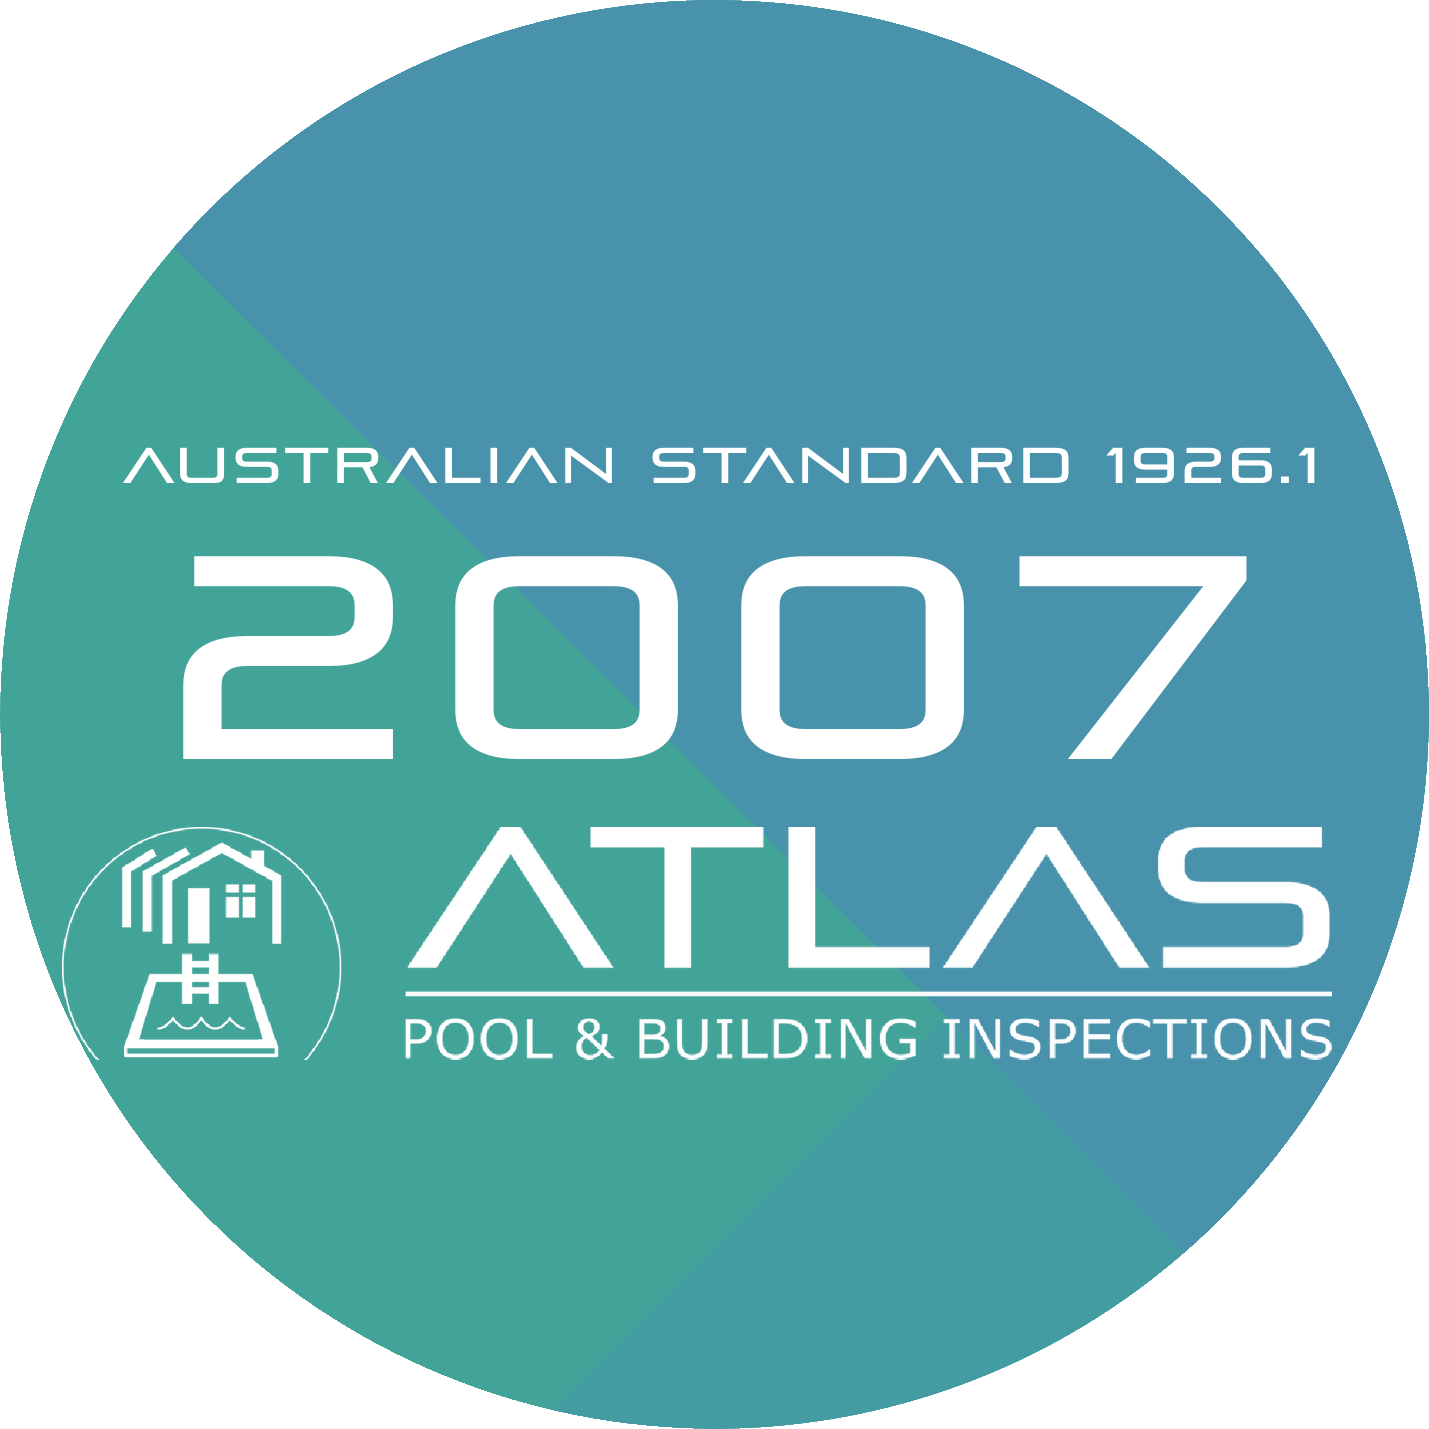 Pool Safety Report for AS 1926.1 - 2007